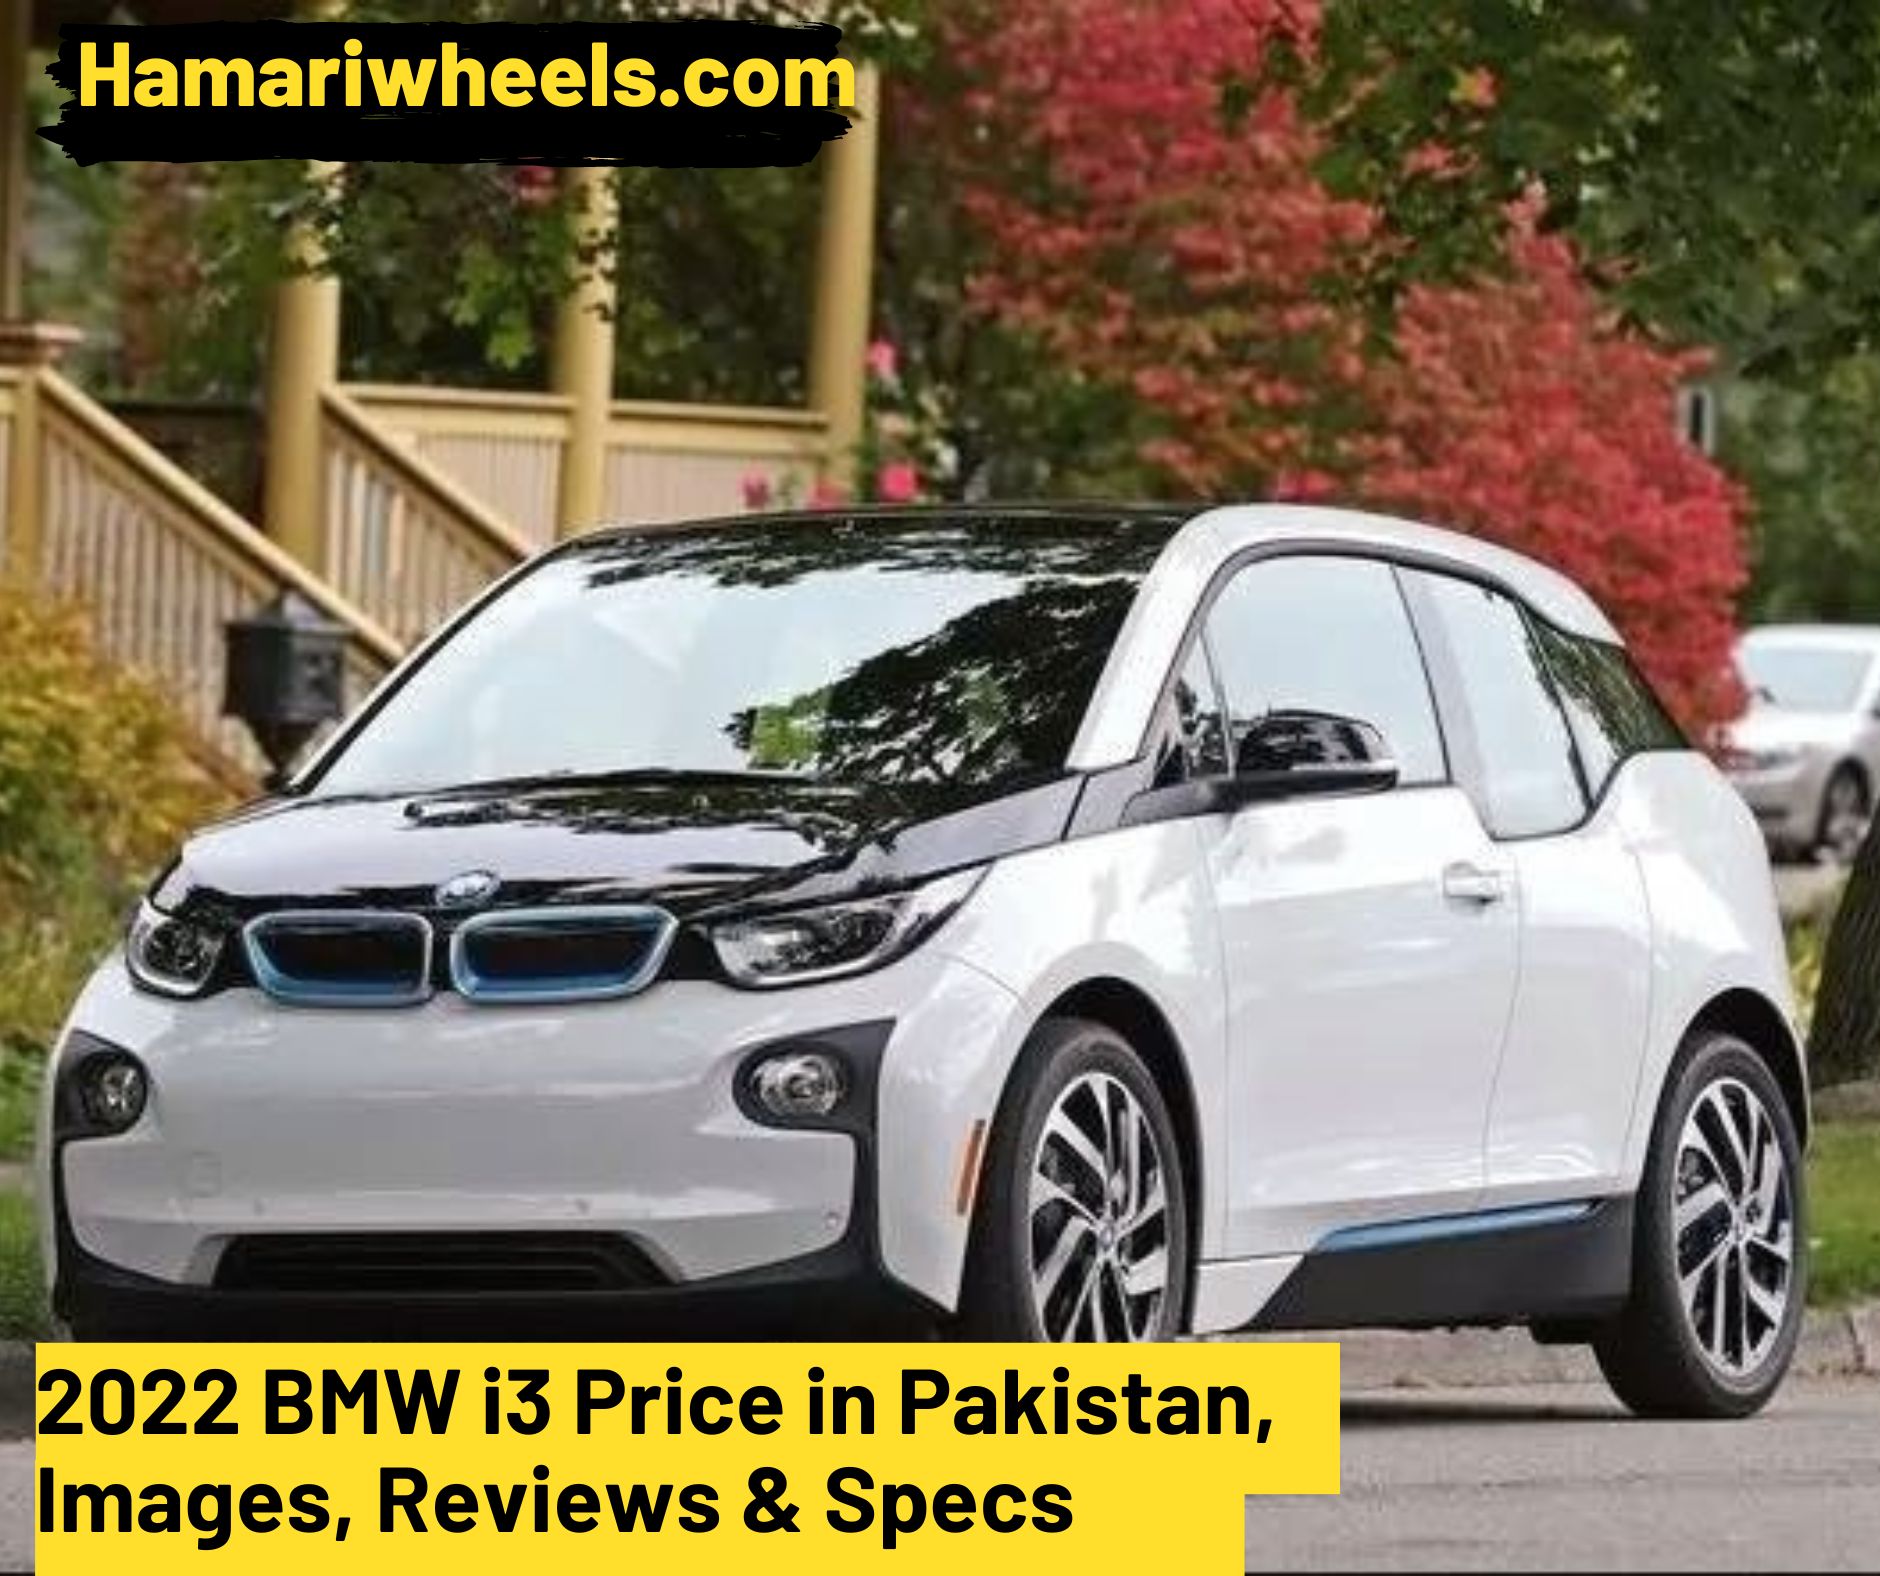 2022 BMW i3 Price in Pakistan, Images, Reviews & Specs